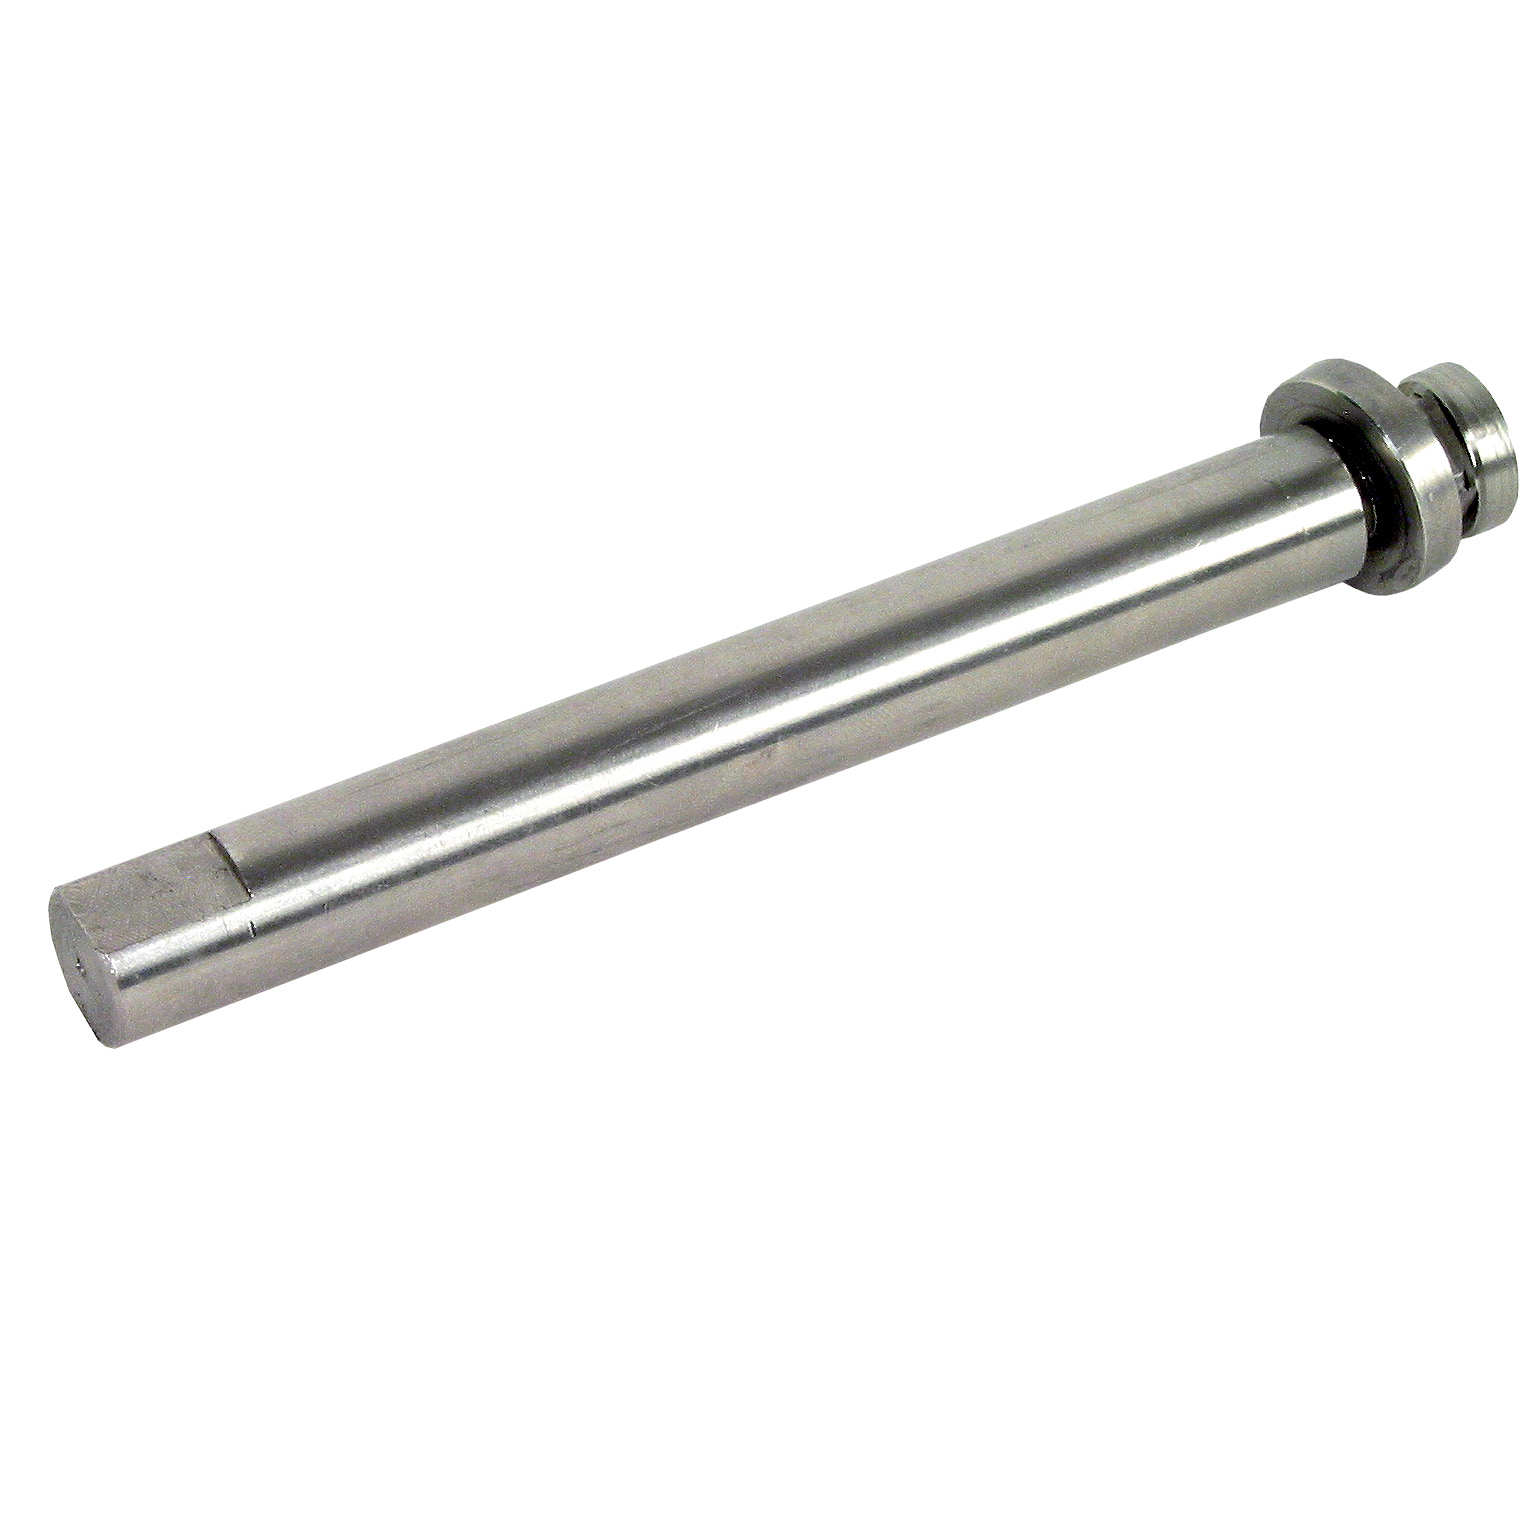 Roller guide accessory - Anchoring system - Stainless steel - 